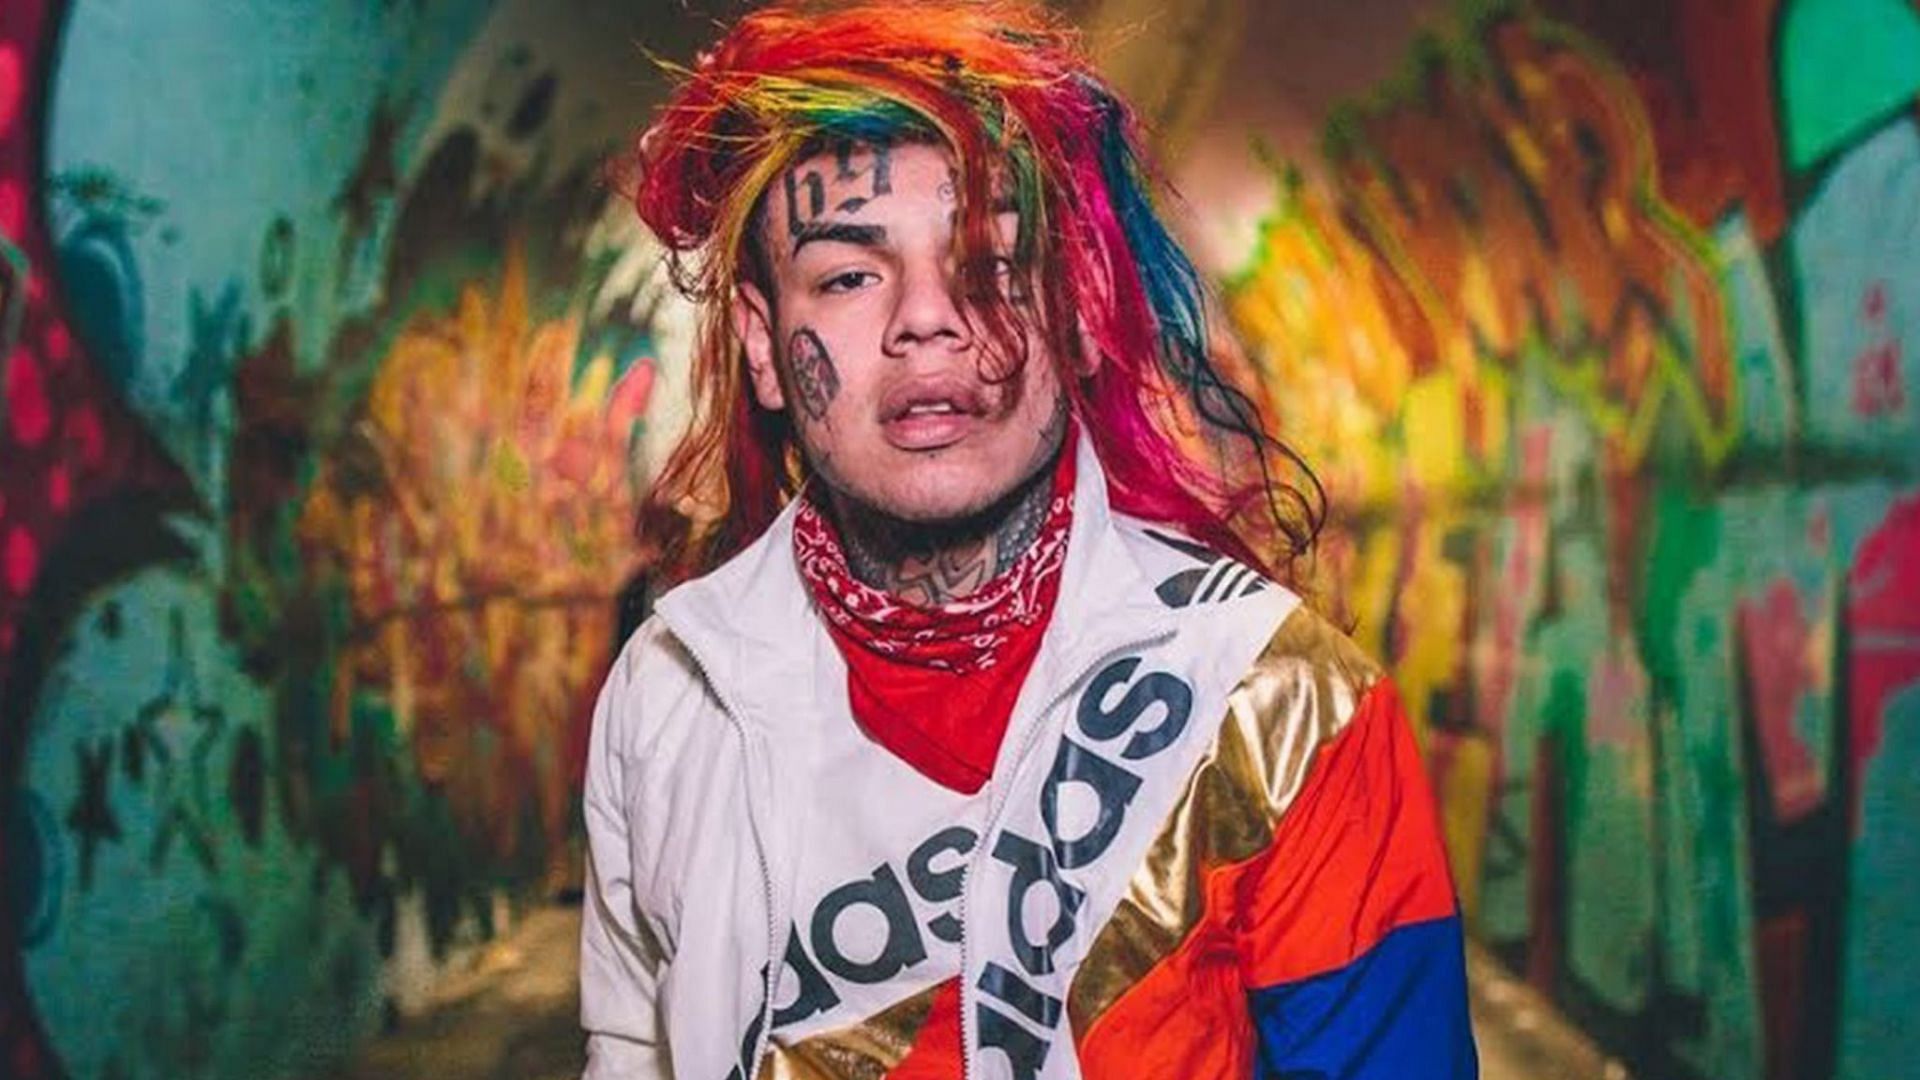 6ix9ine&rsquo;s Spotify account was recently taken over by hackers (Image via Getty Images)